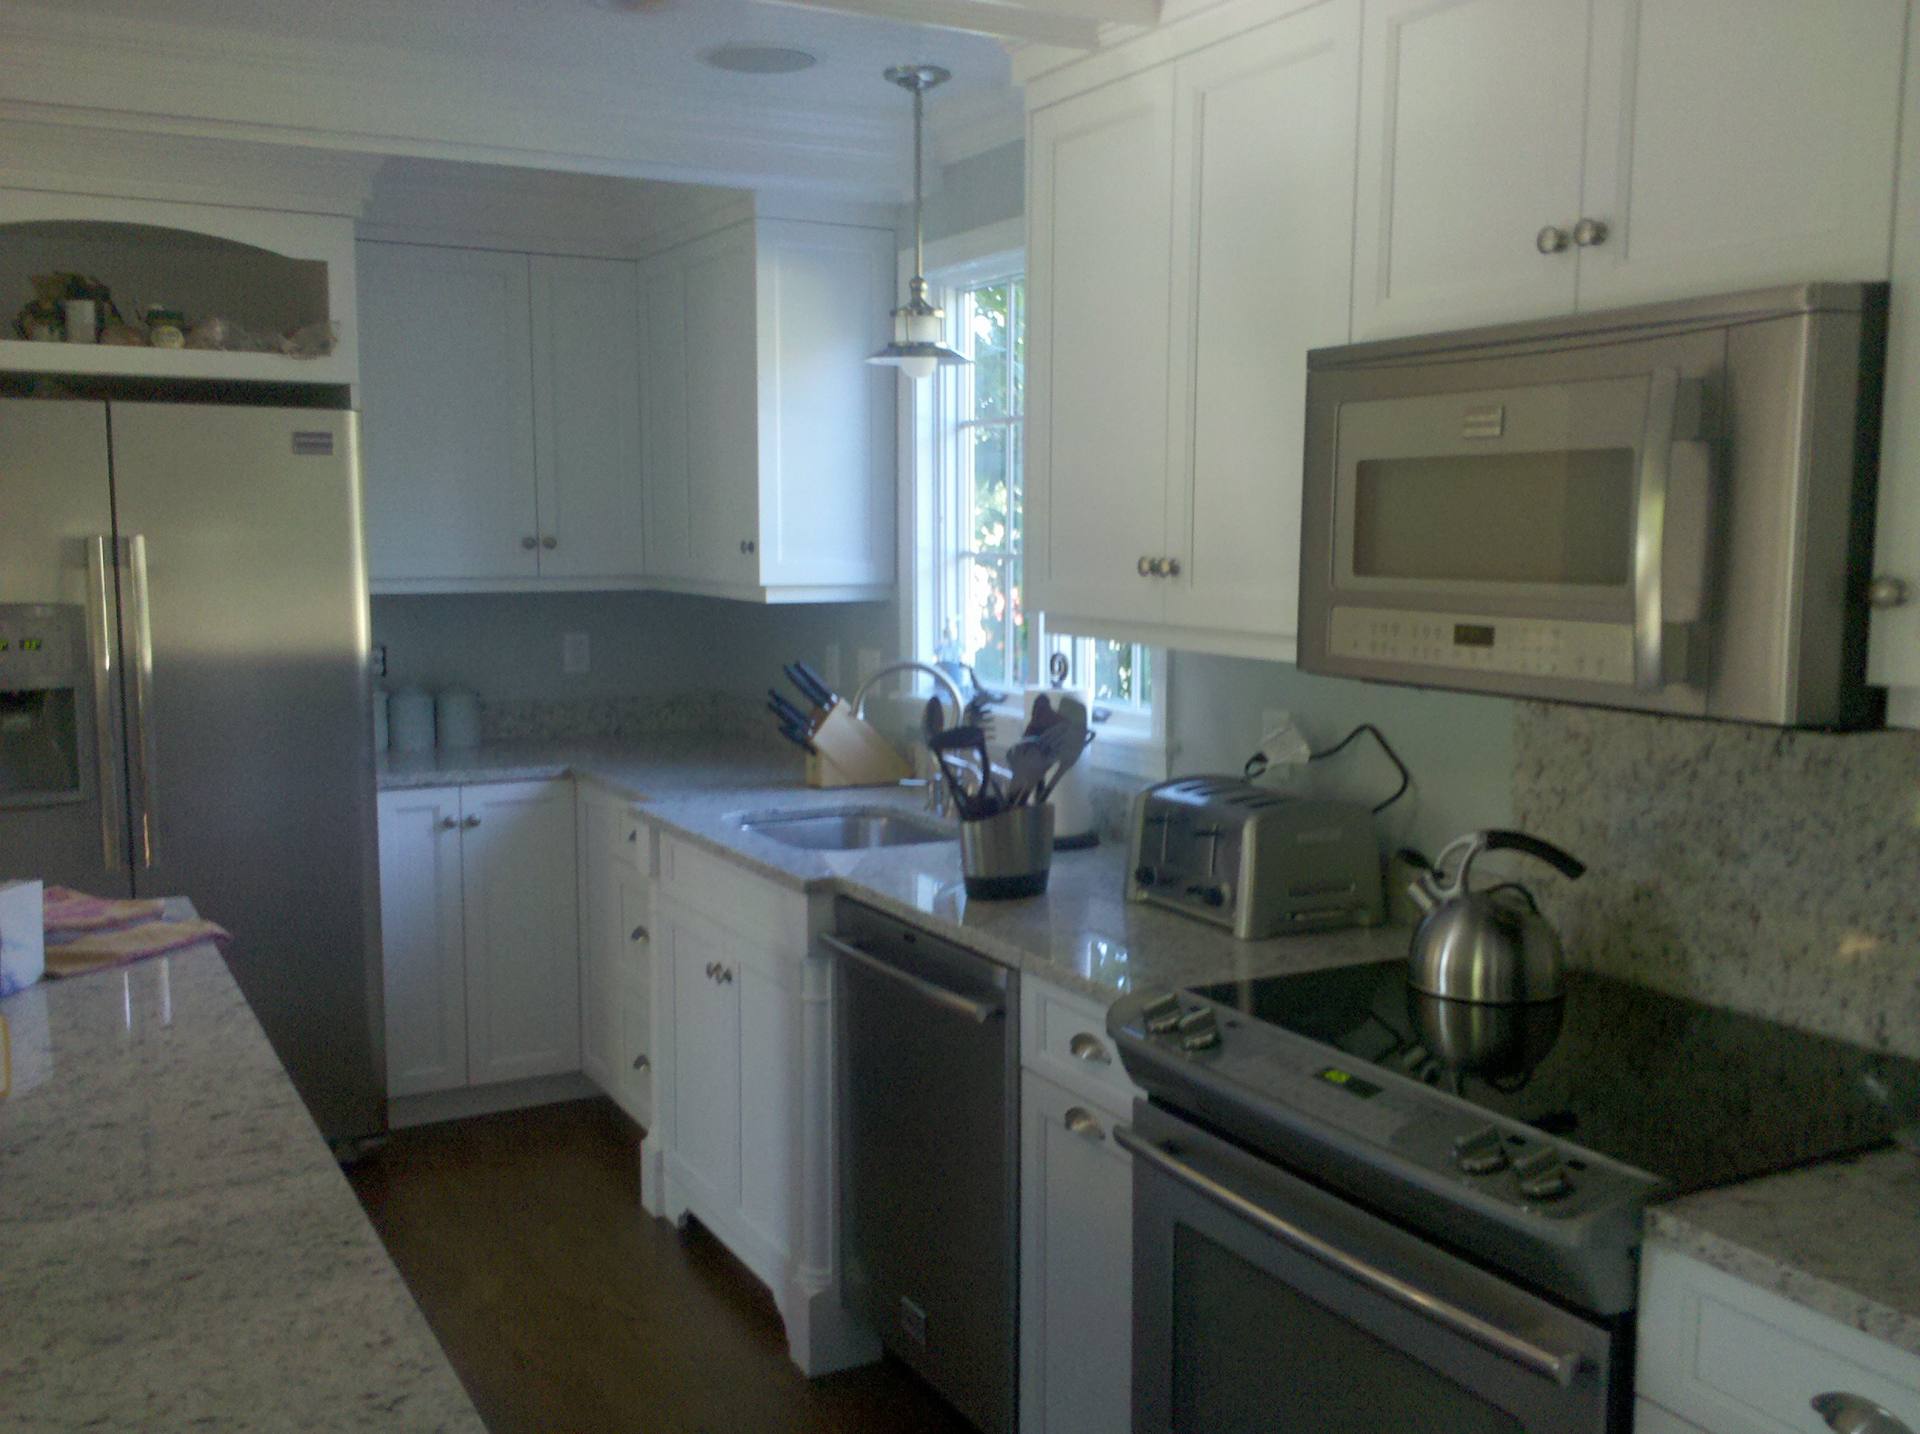 Country House Kitchen Remodel